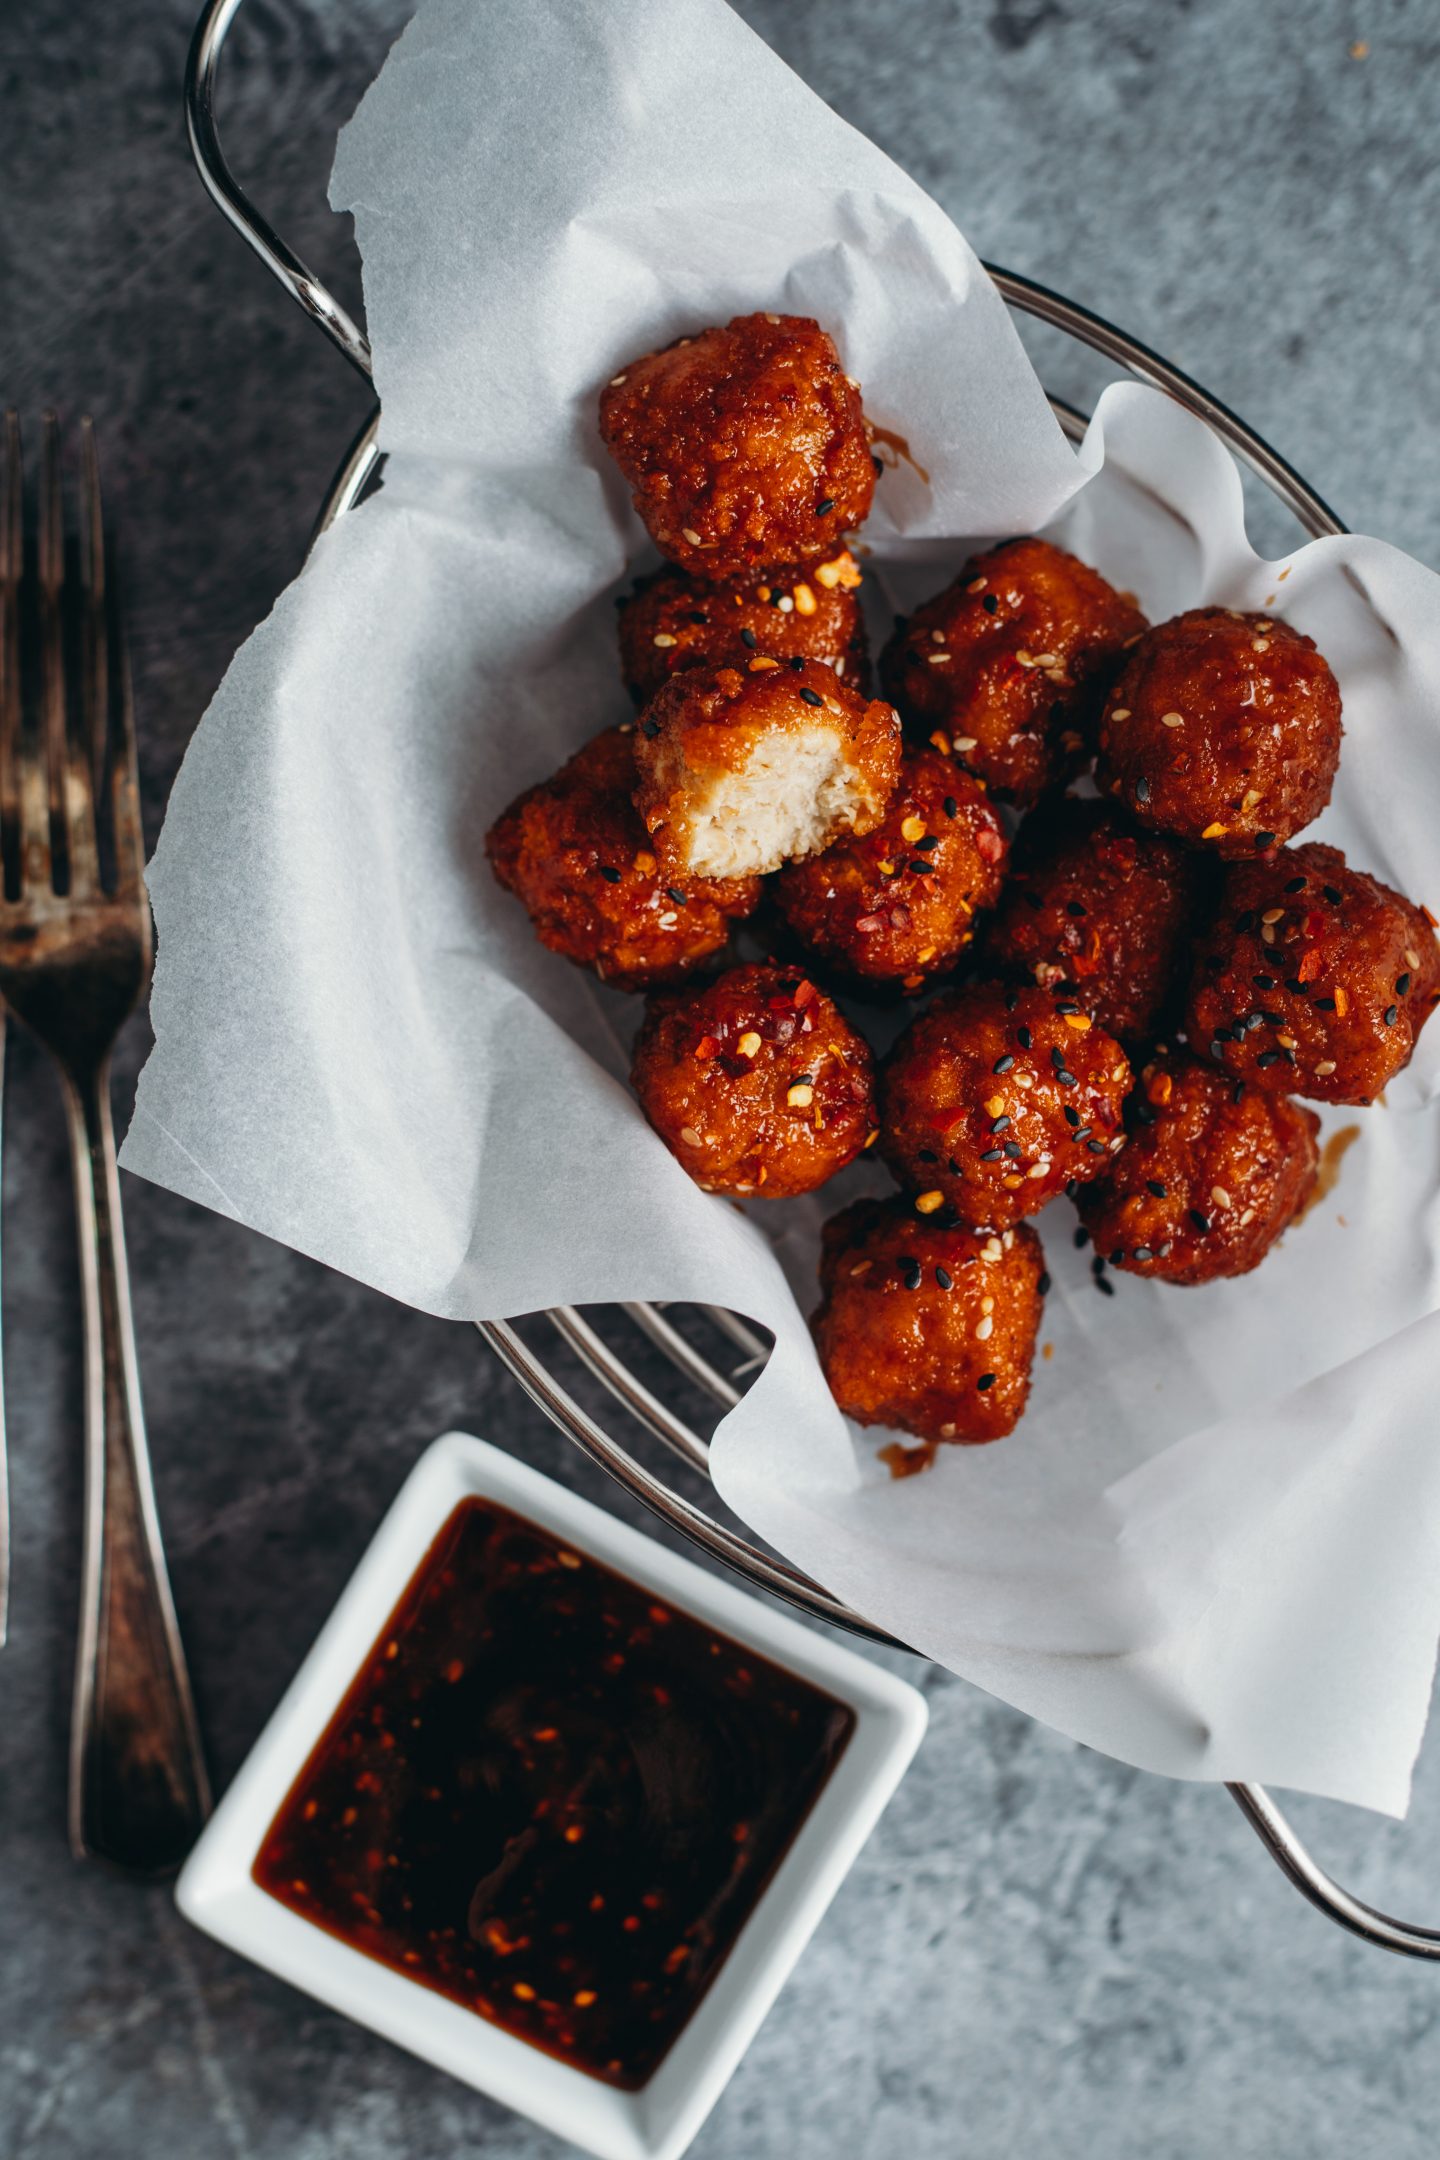 Delicious vegan teriyaki sauce drizzled over vegan chicken balls in a basket lined with white parchment paper. a fork and dish with dark teriyaki sauce to the side, and a bite has been taken out of one of the chicken balls. 